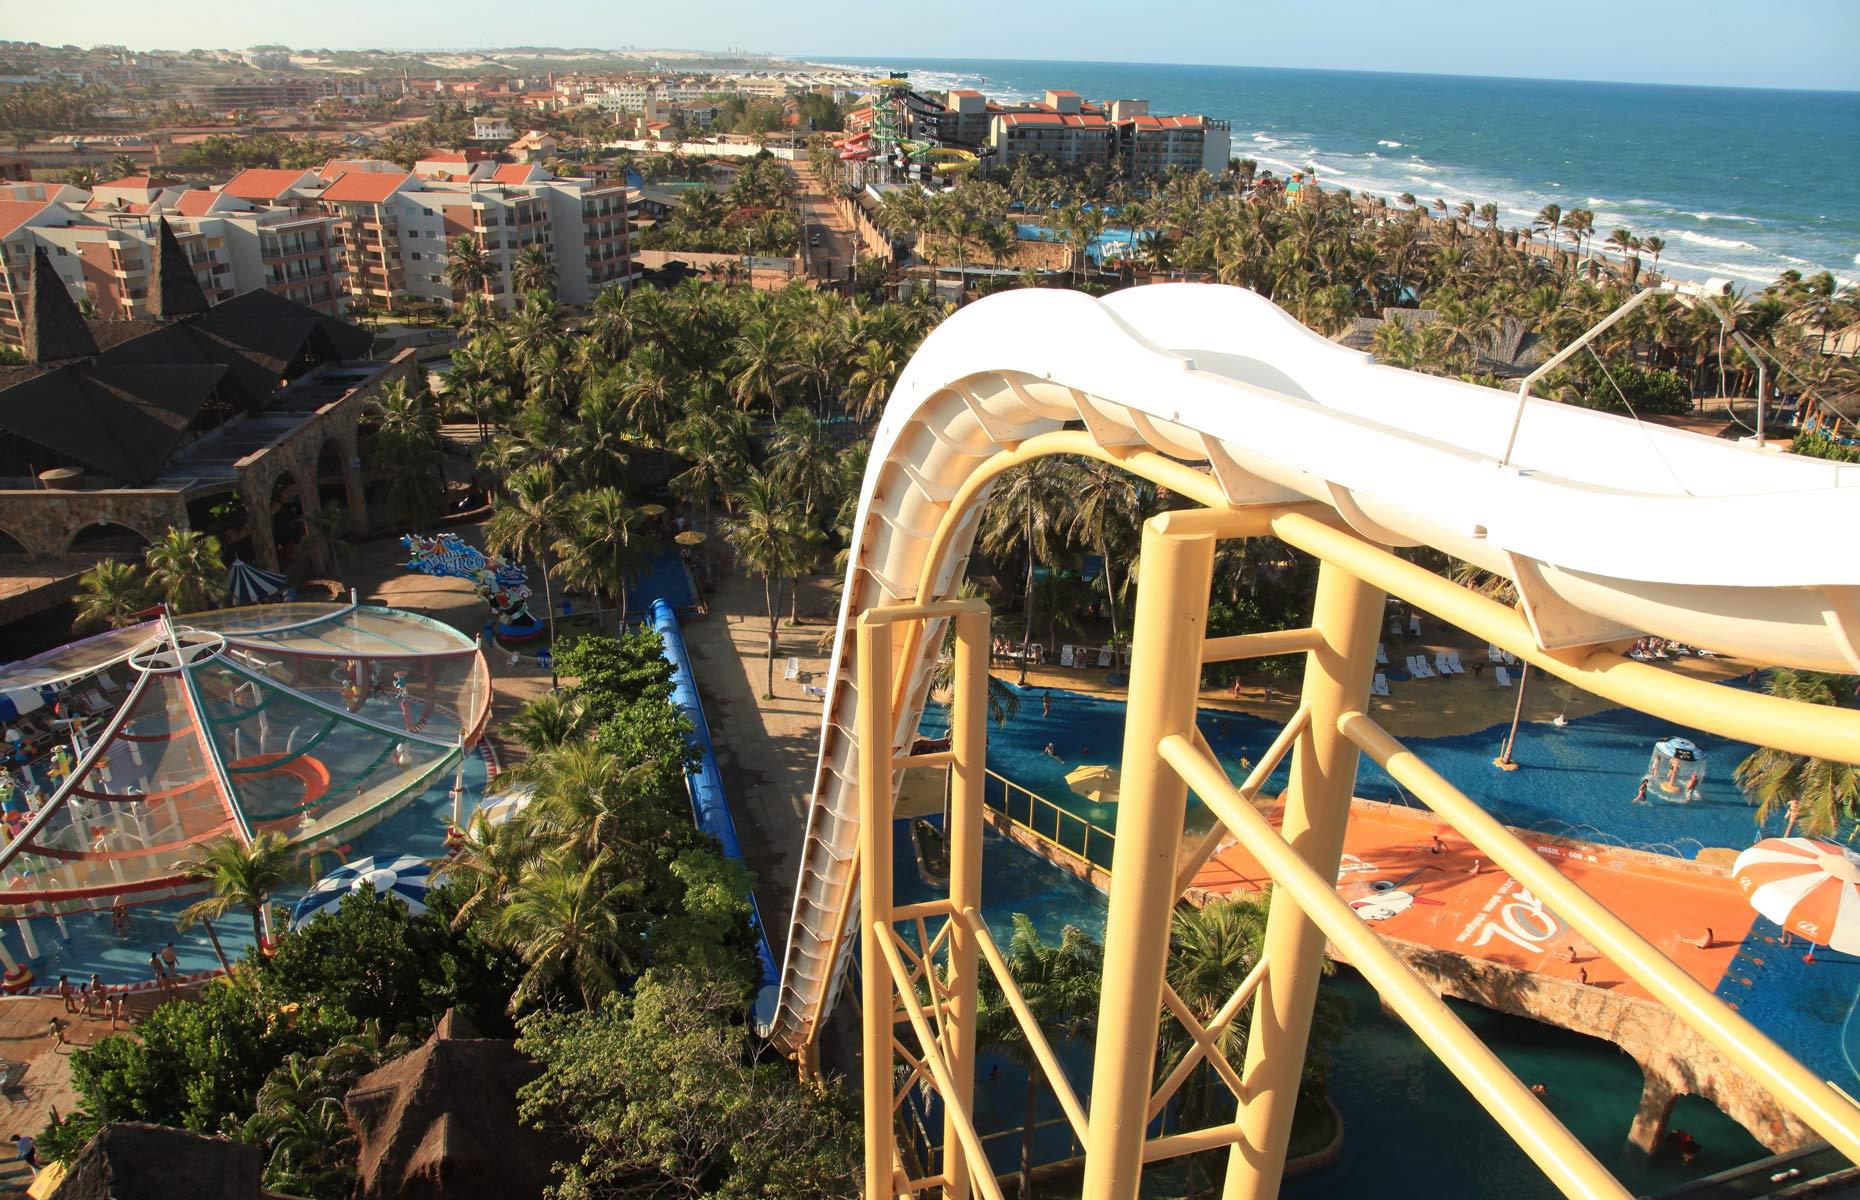 <p>South America’s largest waterpark, which sits on Porto das Dunas beach near Fortaleza, is action-packed. With a choice of pools, plenty of fast-paced slides and a lazy river, there's something to suit everyone. But the park is most famous for its towering water slide Insano. At 135 feet (41m), It's one of the tallest in the world, where riders plummet down at terrifying speeds of around 65 miles per hour (105 km/h).</p>  <p><strong>Liking this? Click on the Follow button above for more great stories from loveEXPLORING</strong></p>